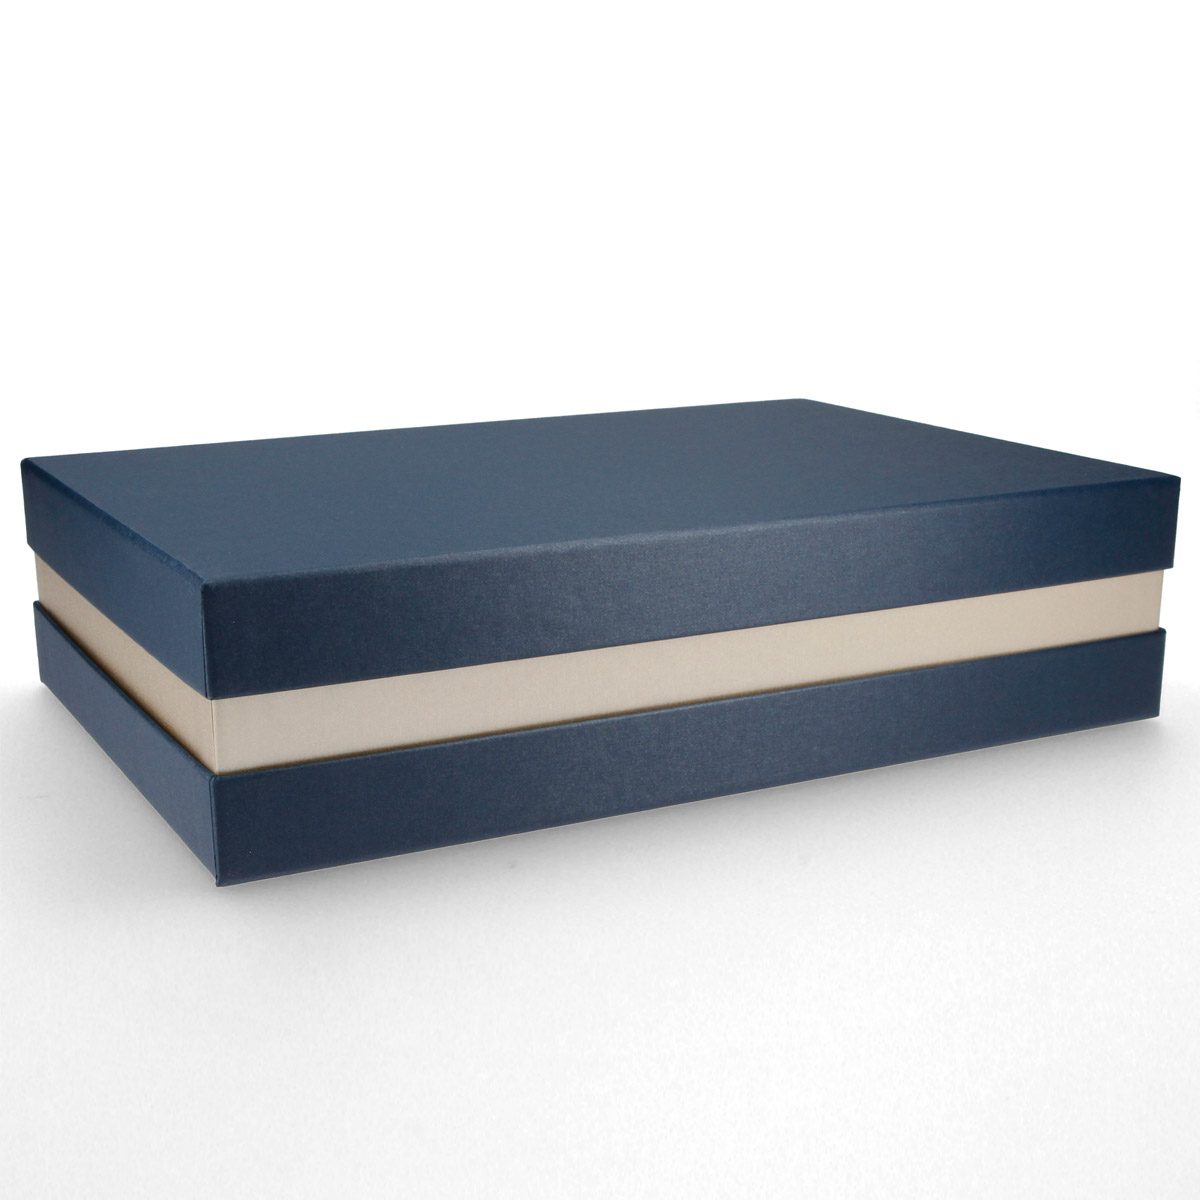 Premium Gift Box Gift Wrapping blue gold